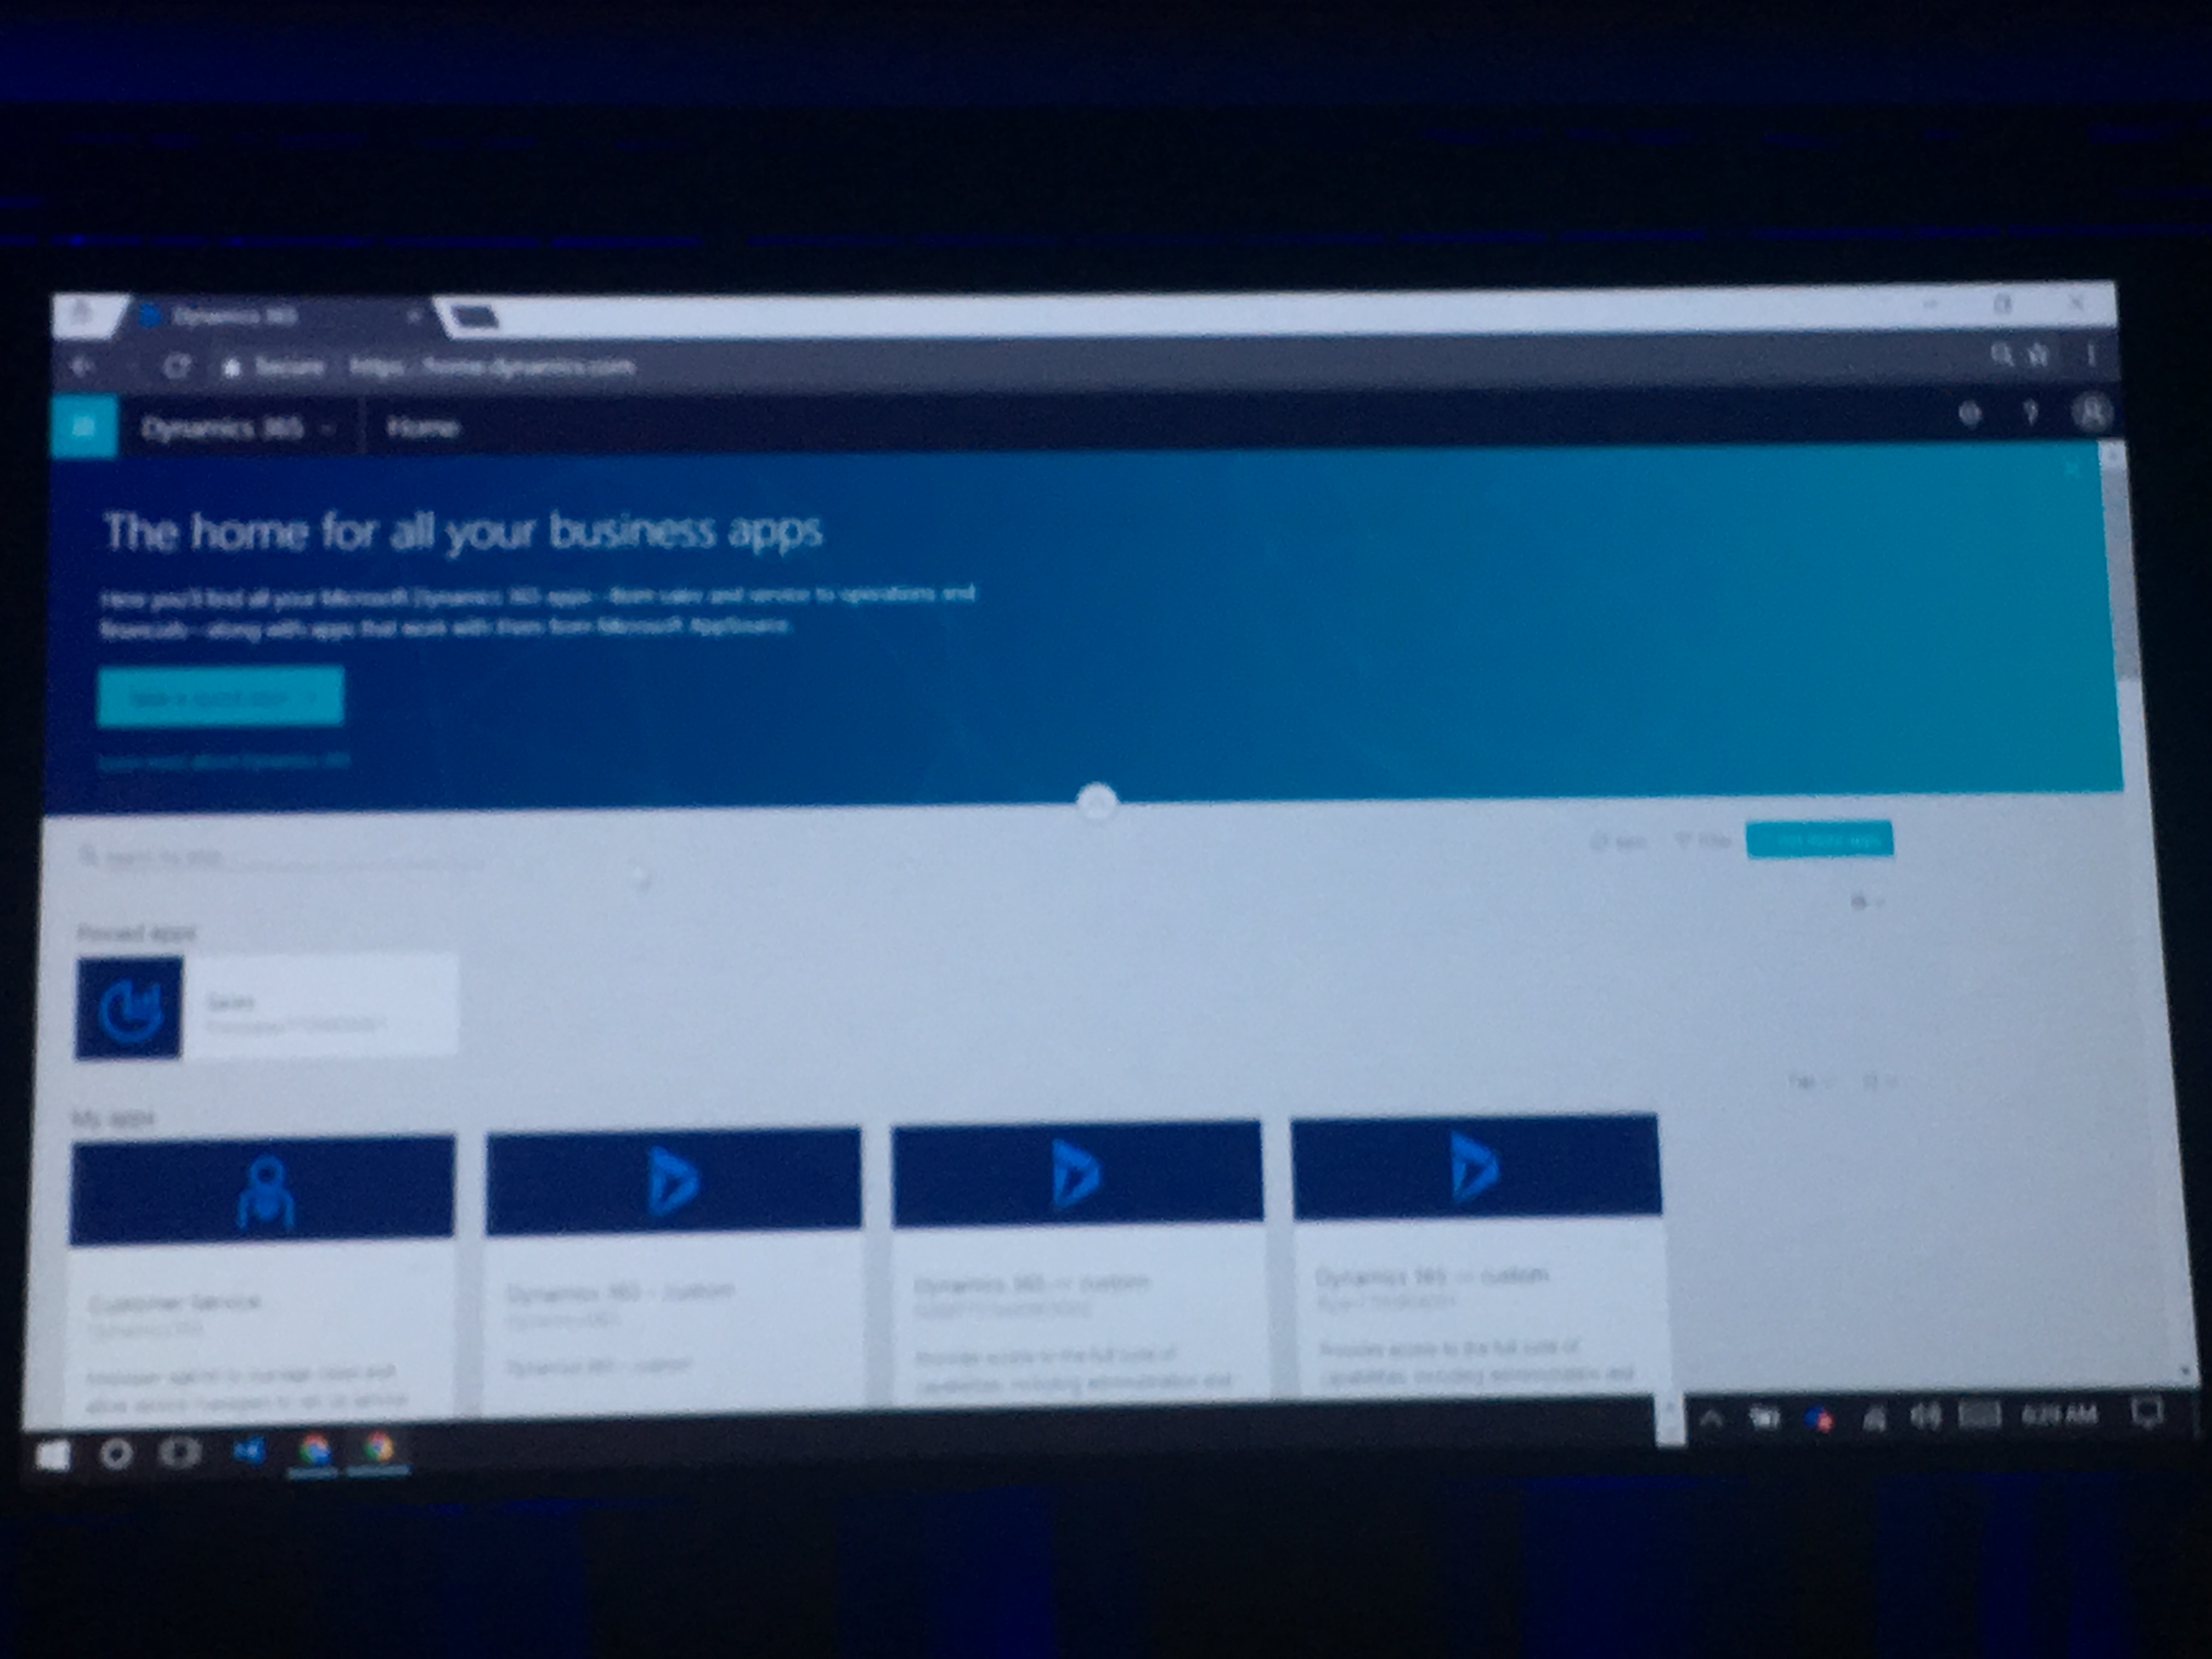 Dynamics365 for Sales